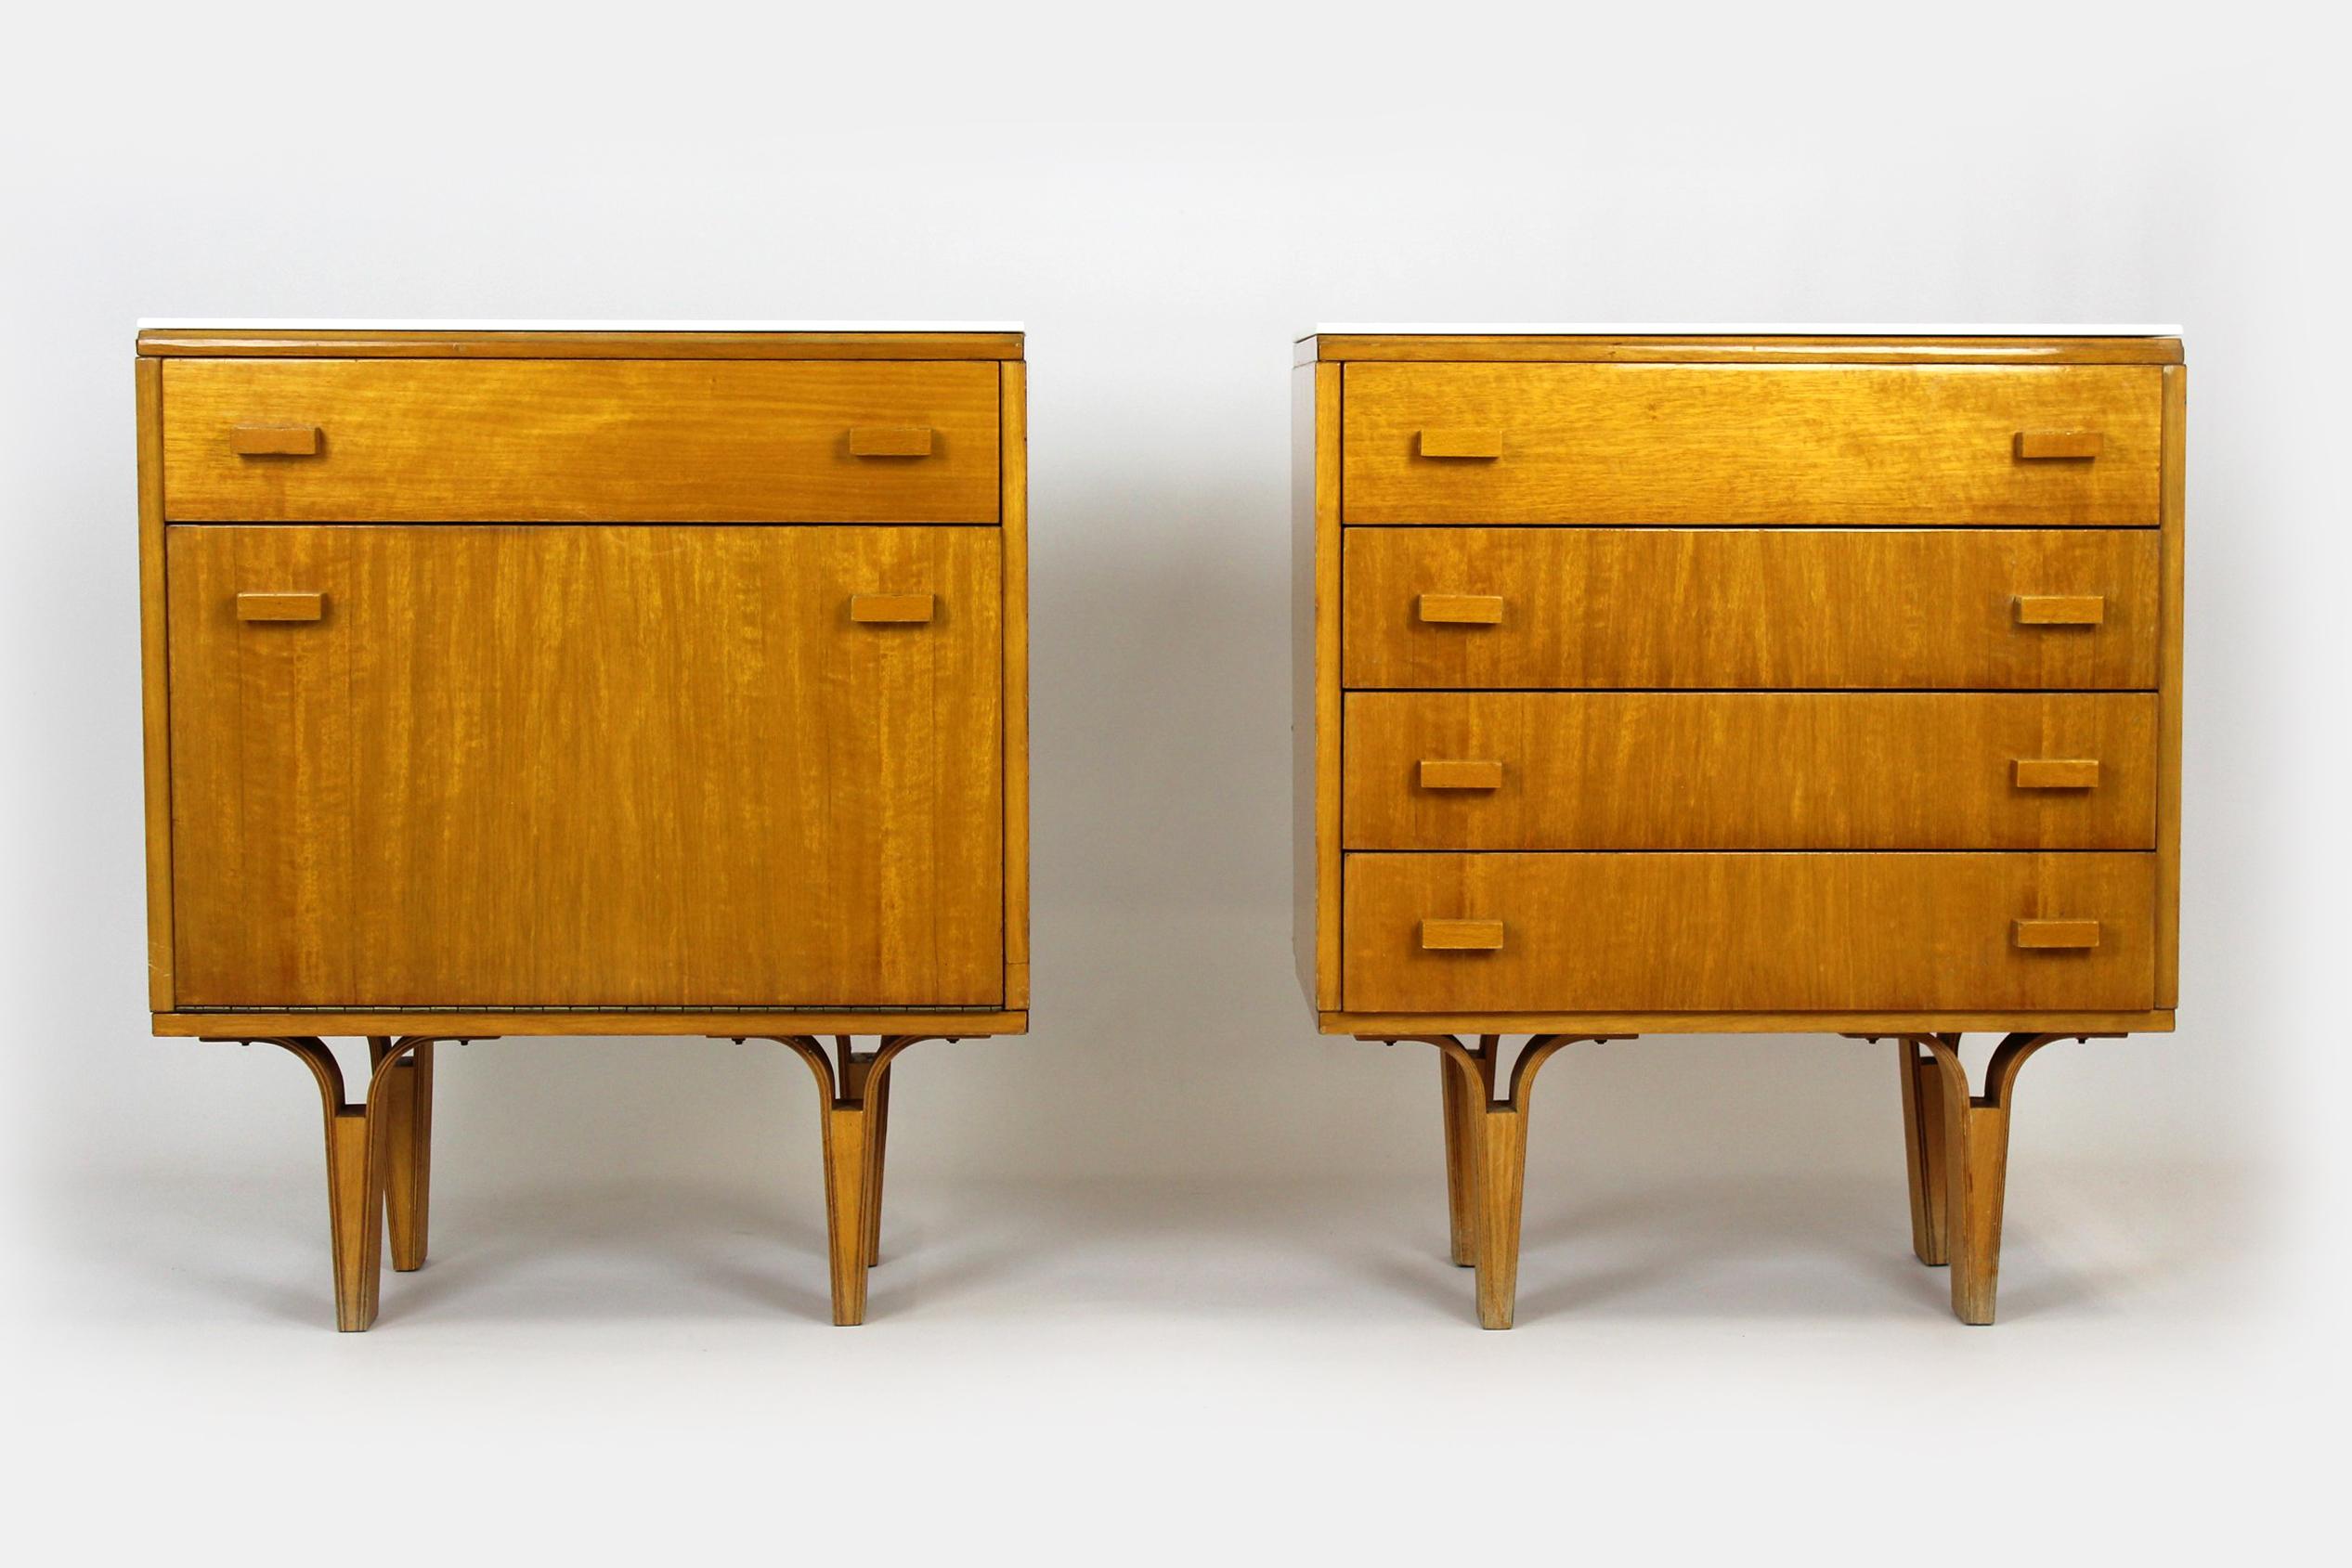 This pair of vintage bedside tables was manufactured in the 1960s/1970s by Nový domov NP (Czech Republic). The legs are made of bent plywood, the cabinets have white glass tops.
Original, good condition.